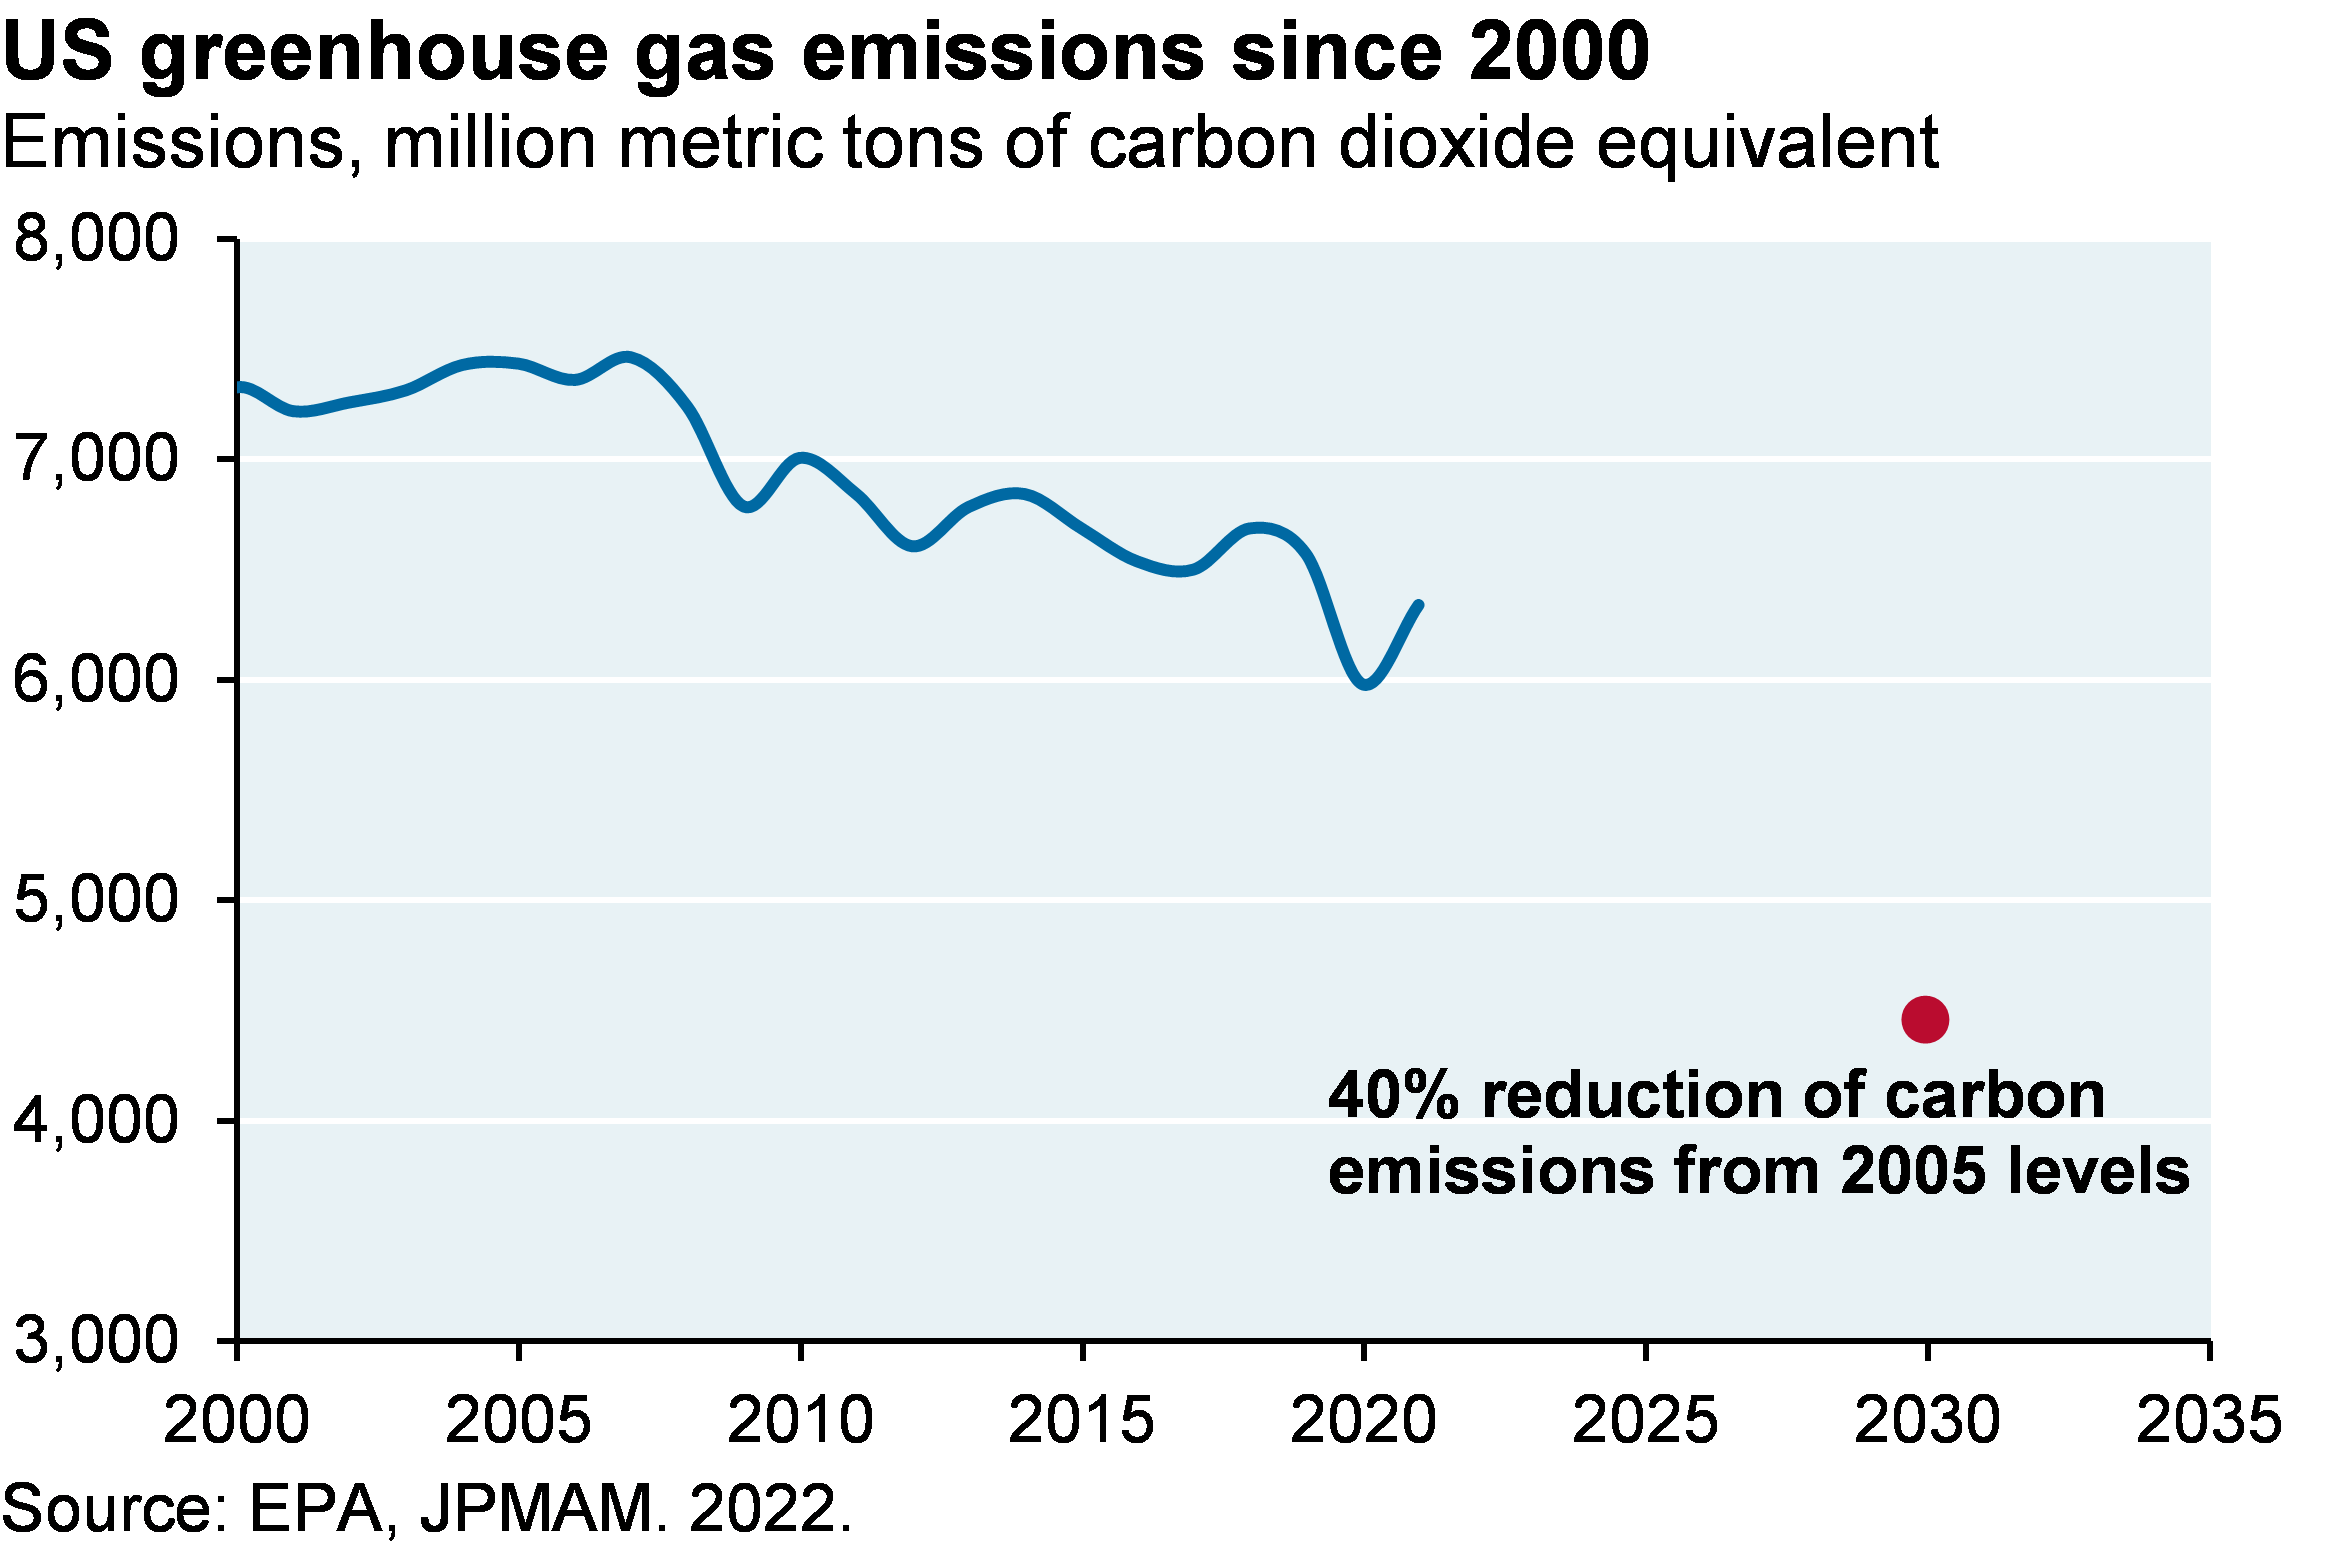 US greenhouse gas emissions since 2000